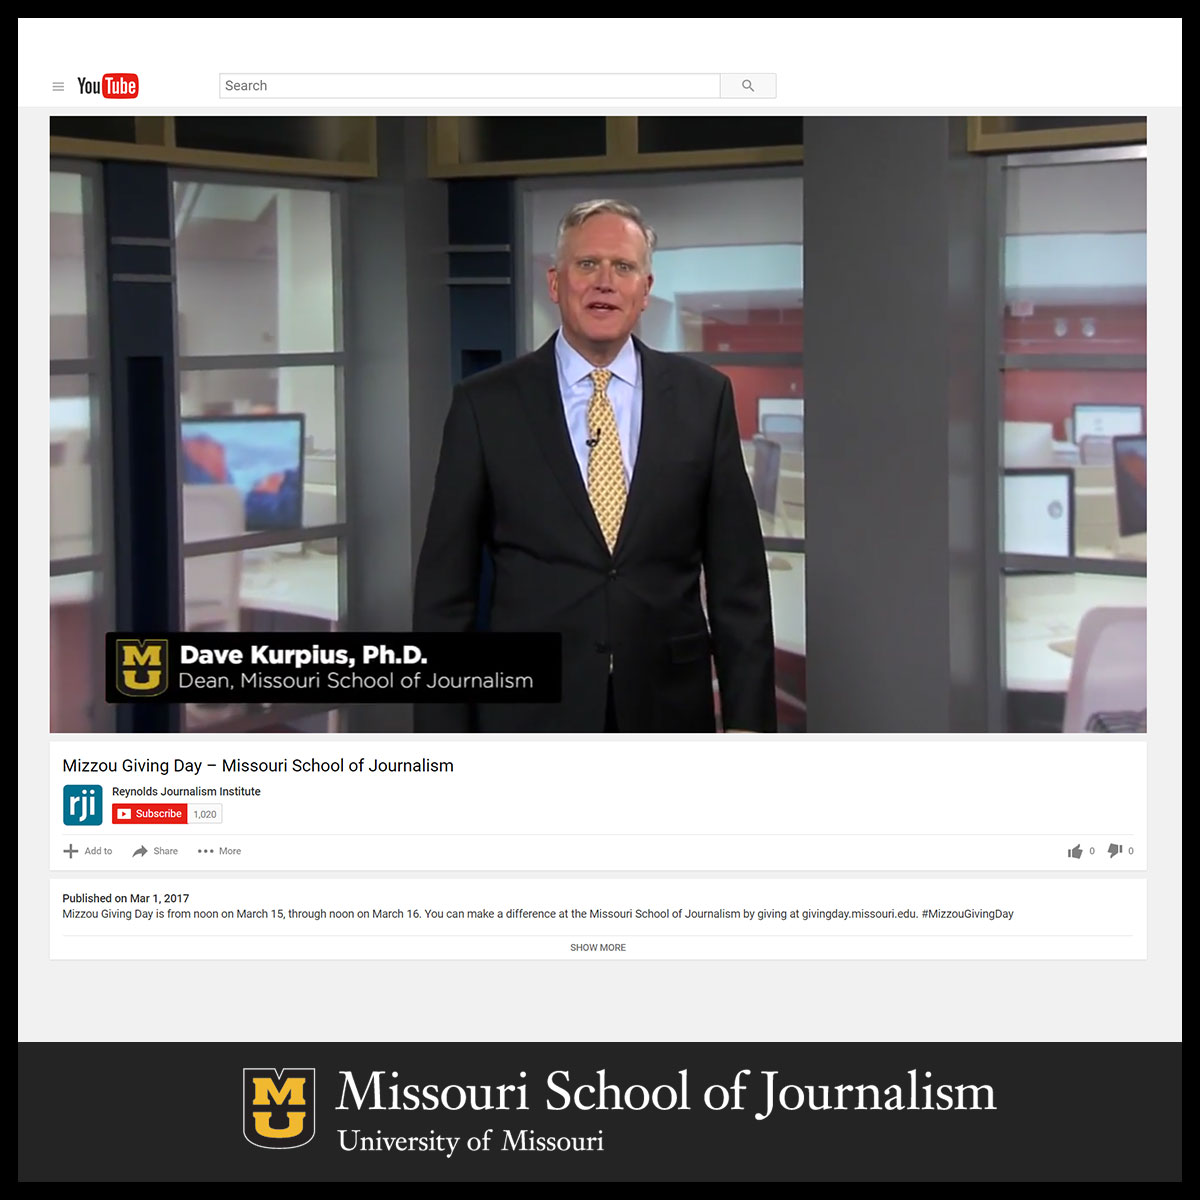 Support the J-School on Mizzou Giving Day